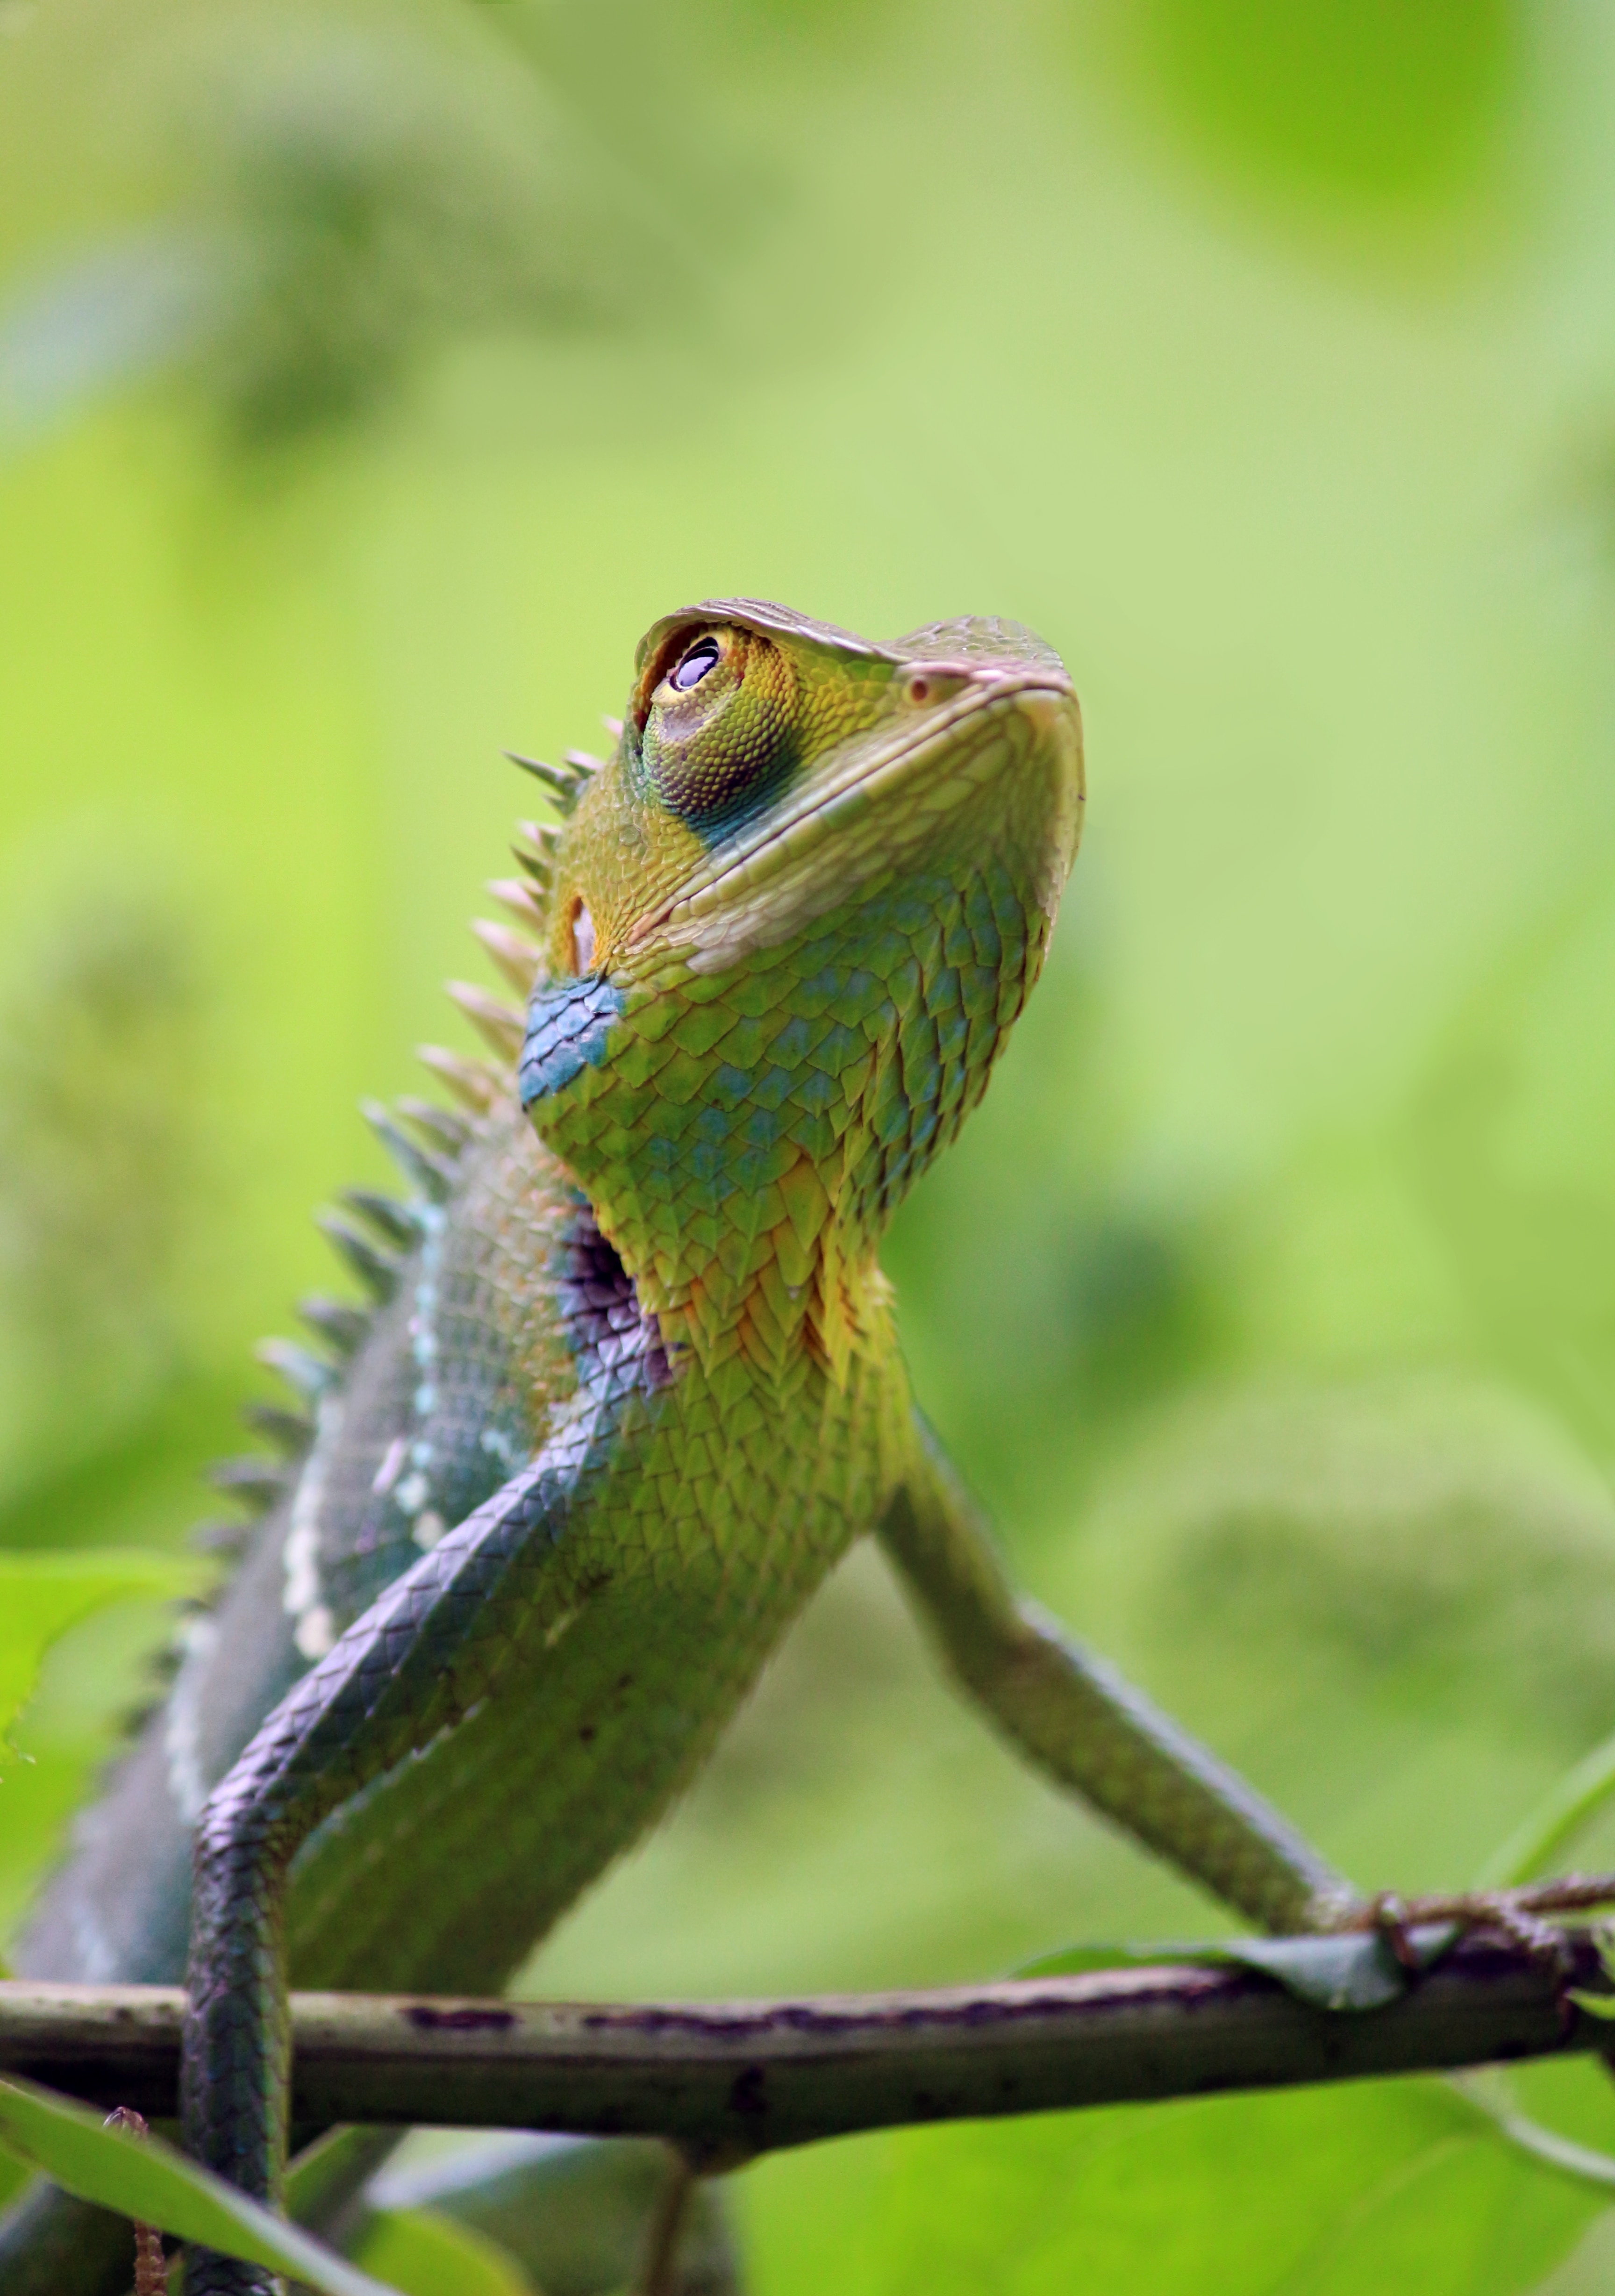 green, yellow and grey chameleon